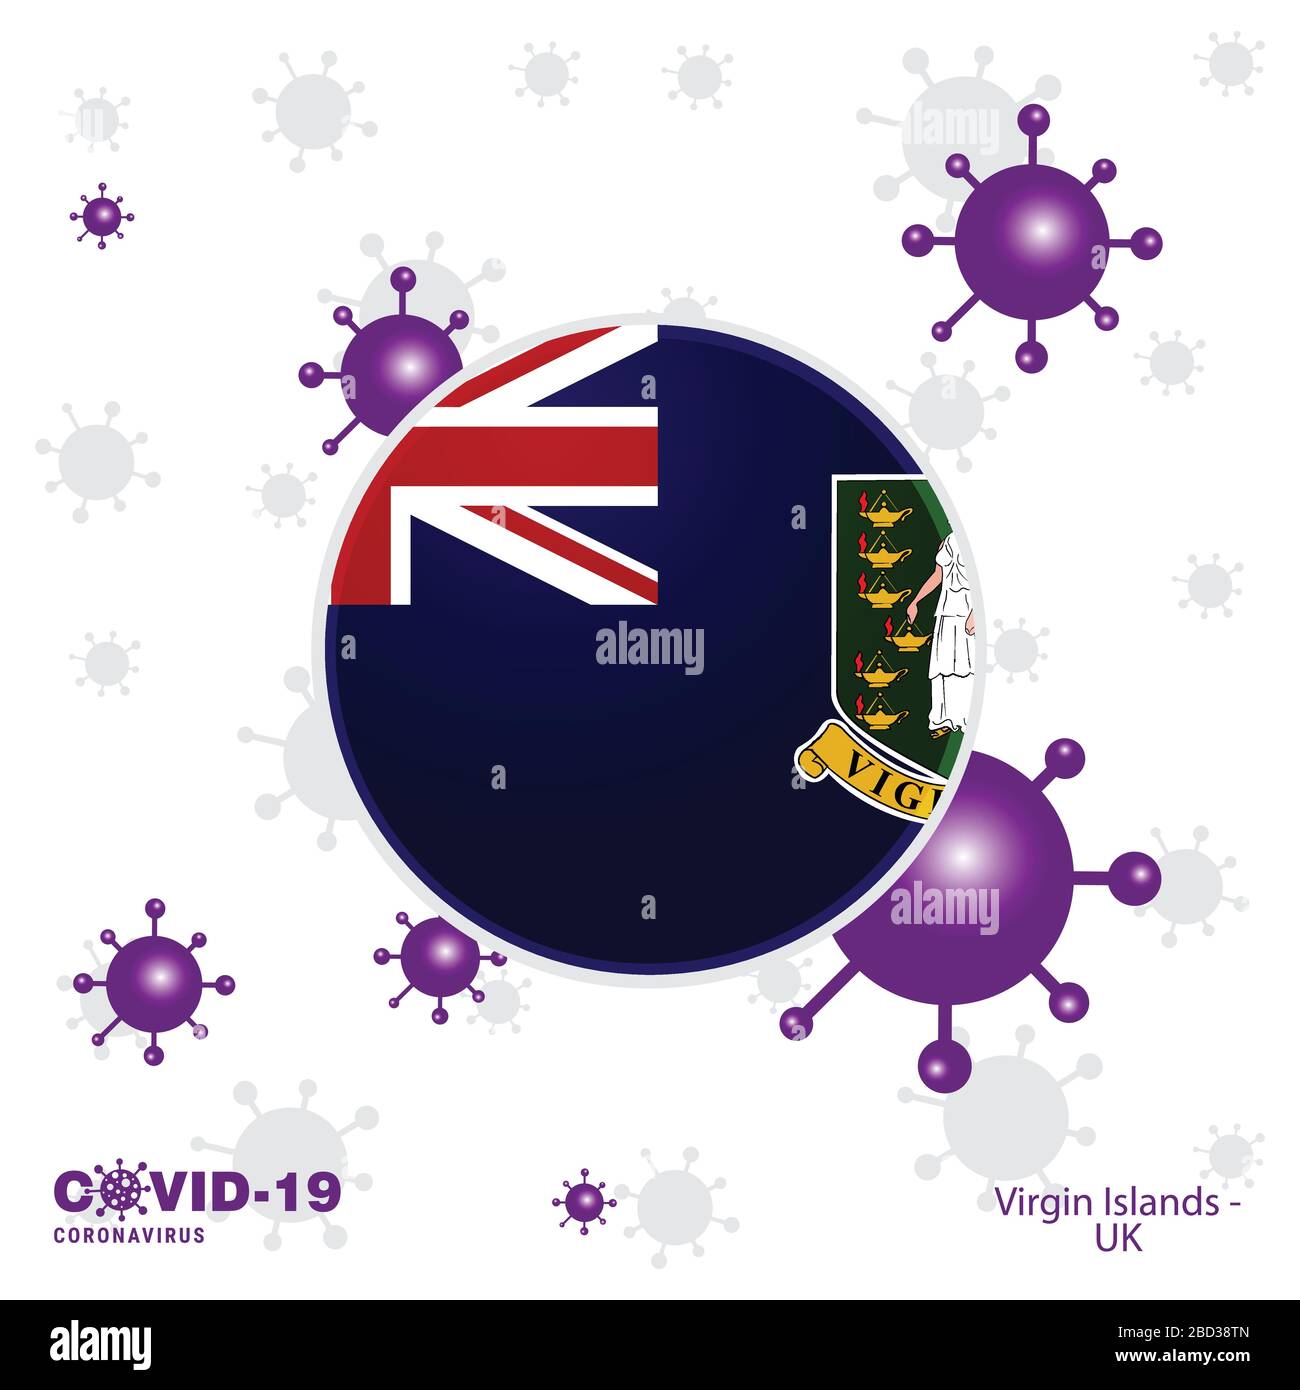 Pray For Virgin Islands UK. COVID-19 Coronavirus Typography Flag. Stay home, Stay Healthy. Take care of your own health Stock Vector